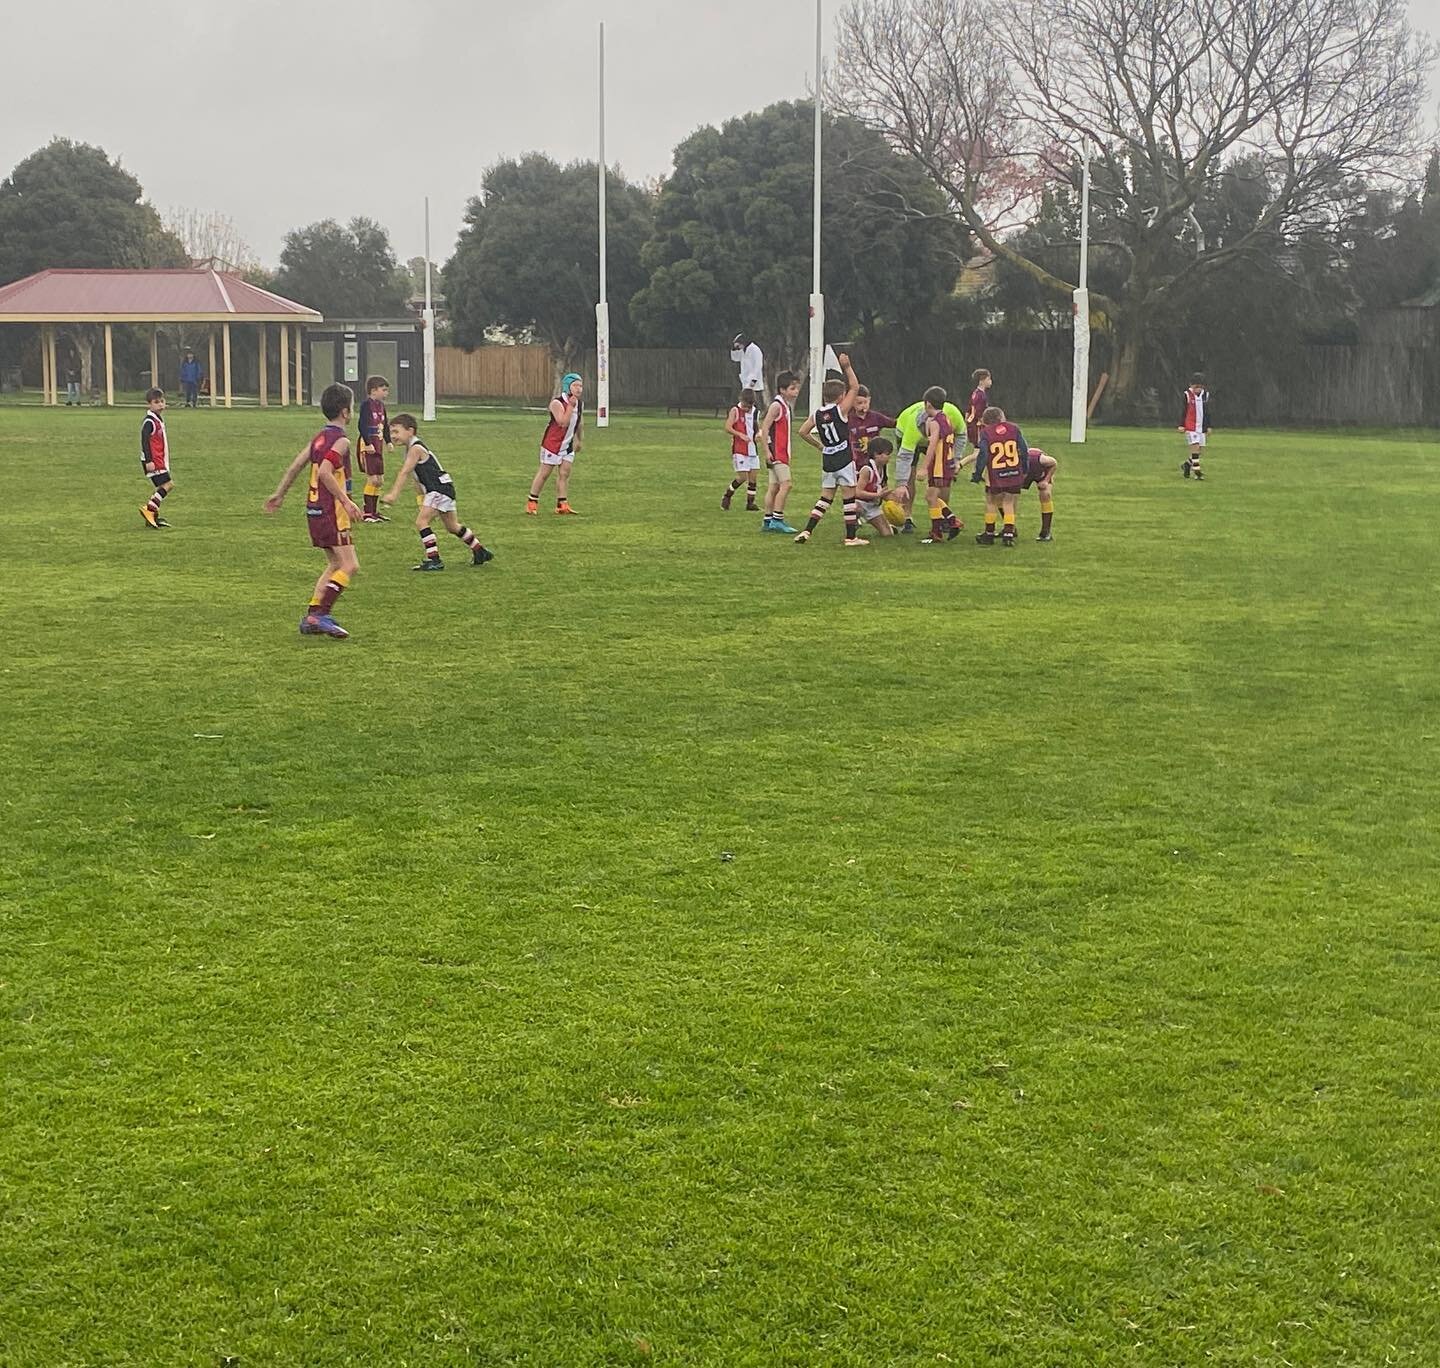 Under 8 Lions had rain, rain, rain and sun ! Nothing like seeing kids when the ball is down the other end using their opponent as a windbreak ! Well played team and coaches ! #gobeena